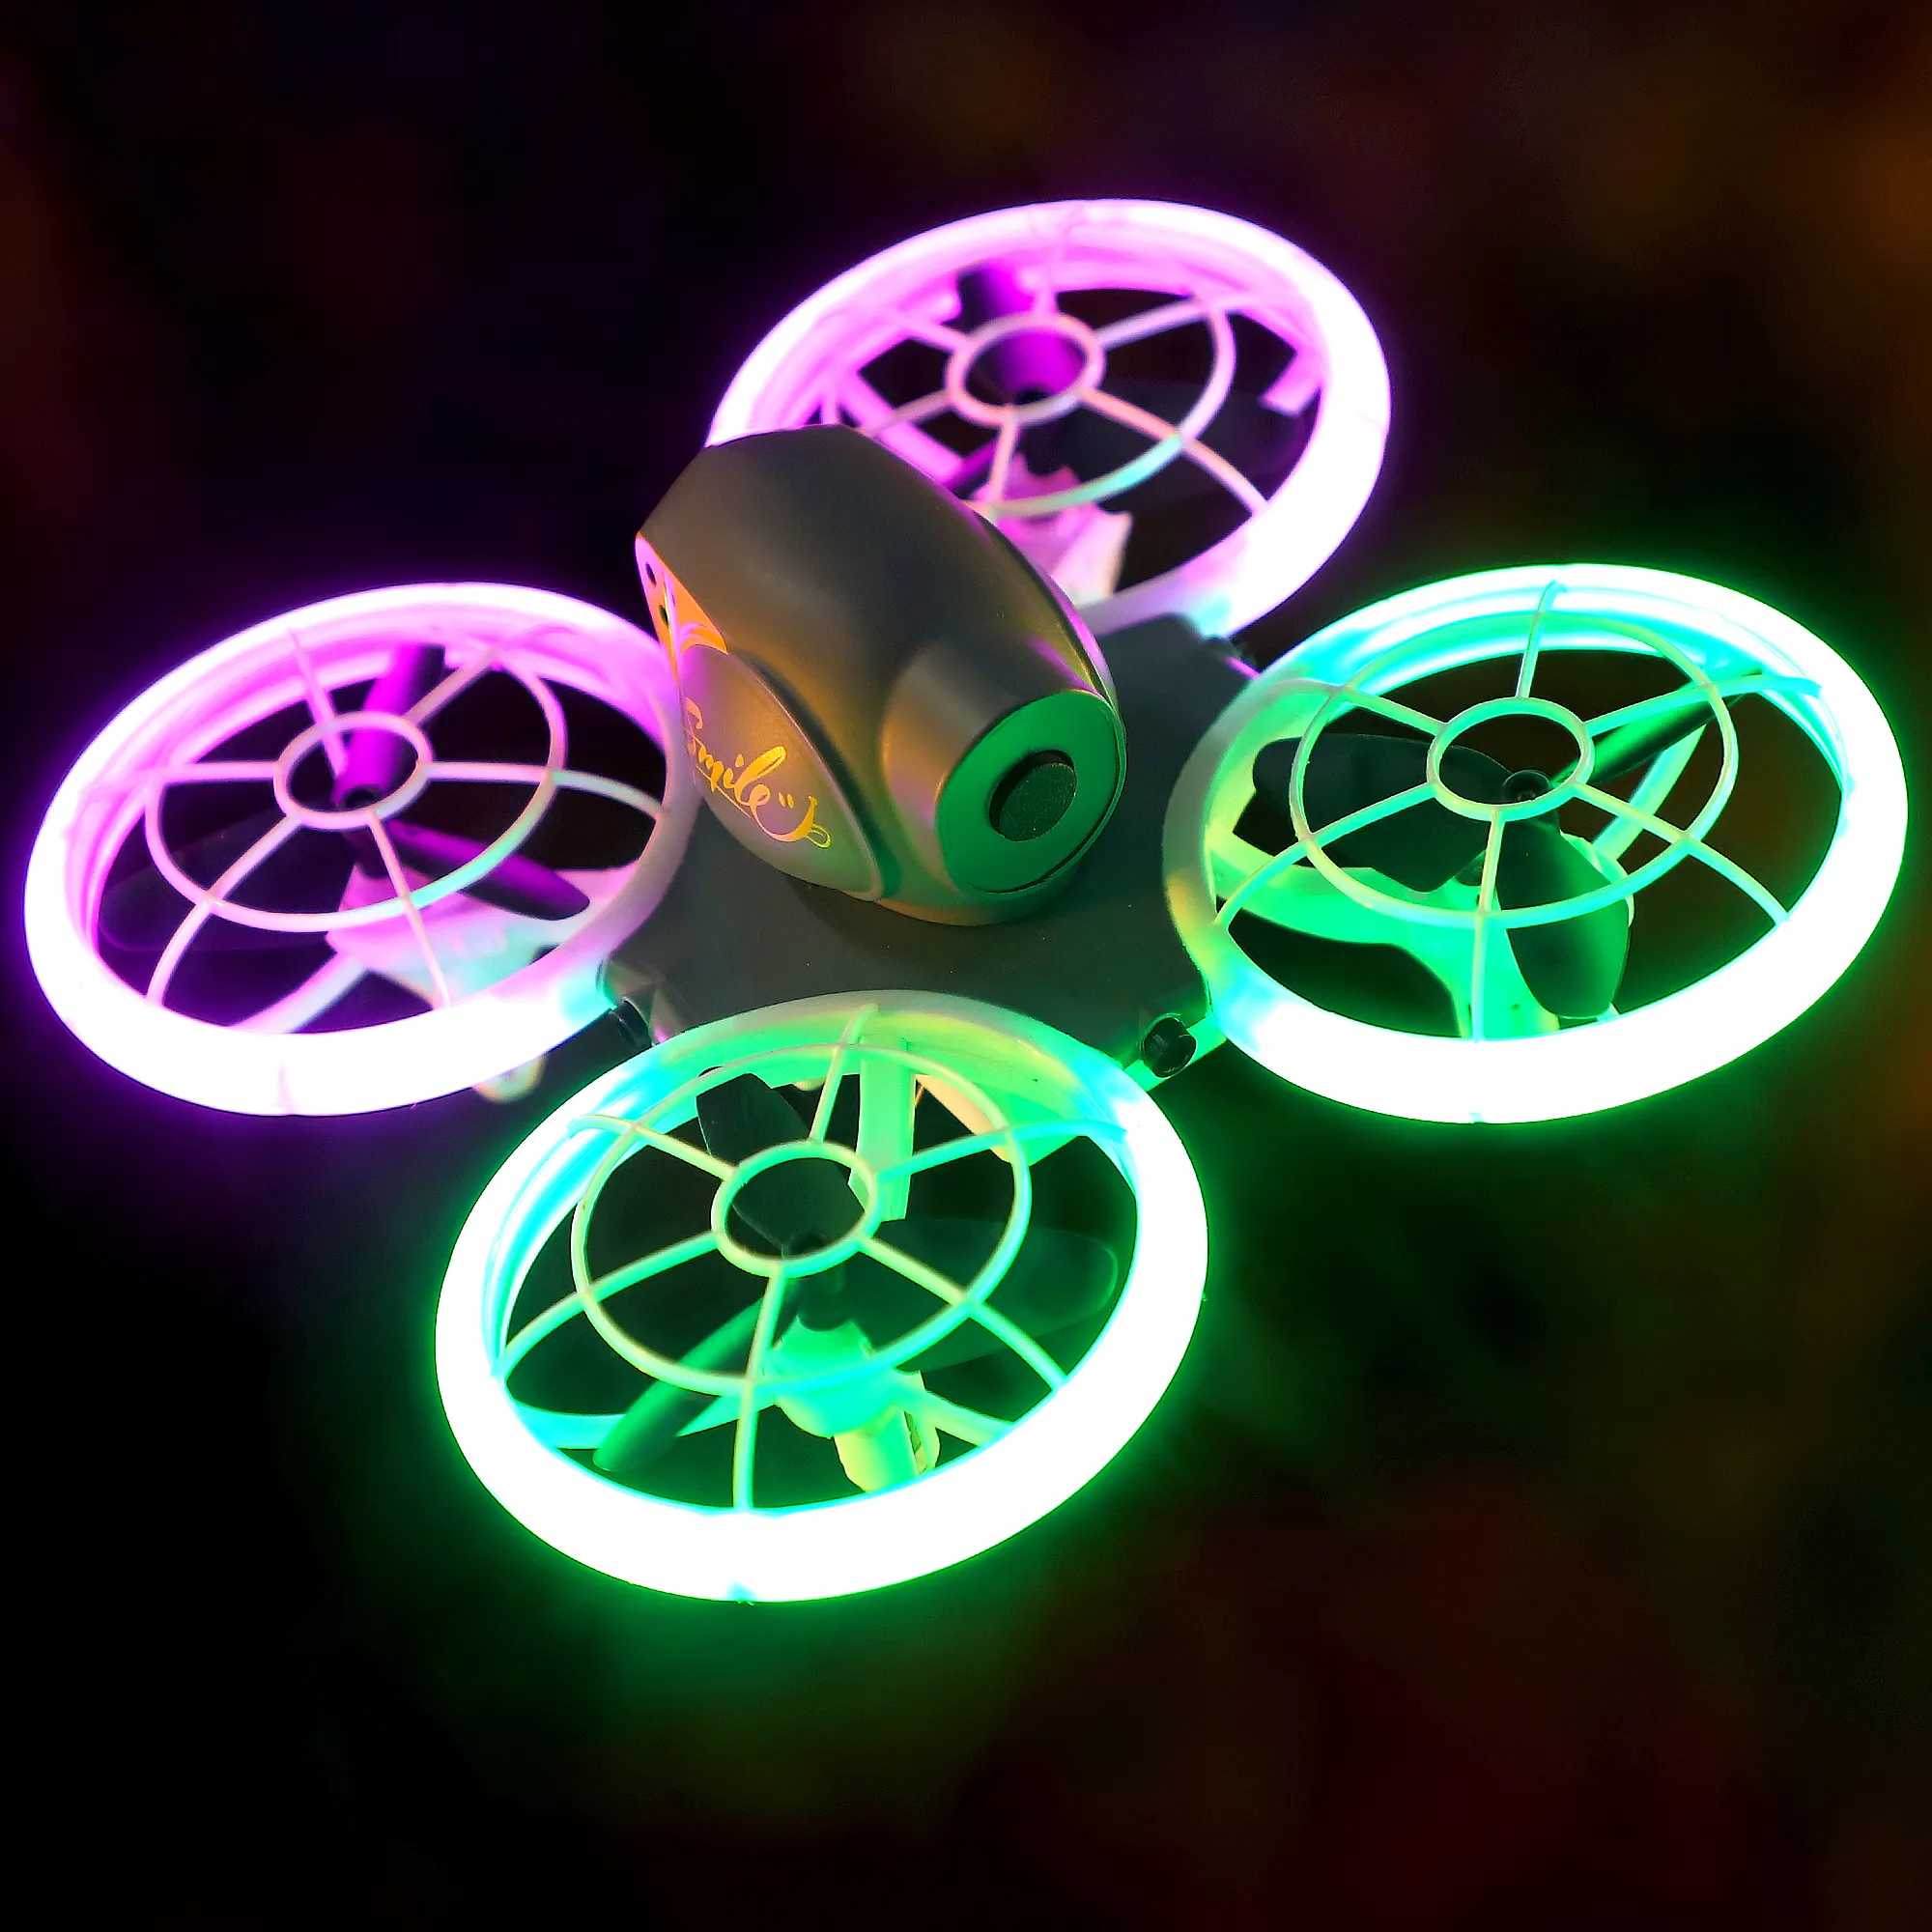 Cheap Small Size Mini RC Drone Toy with Camera Low Price Led Light for Beginners Kids